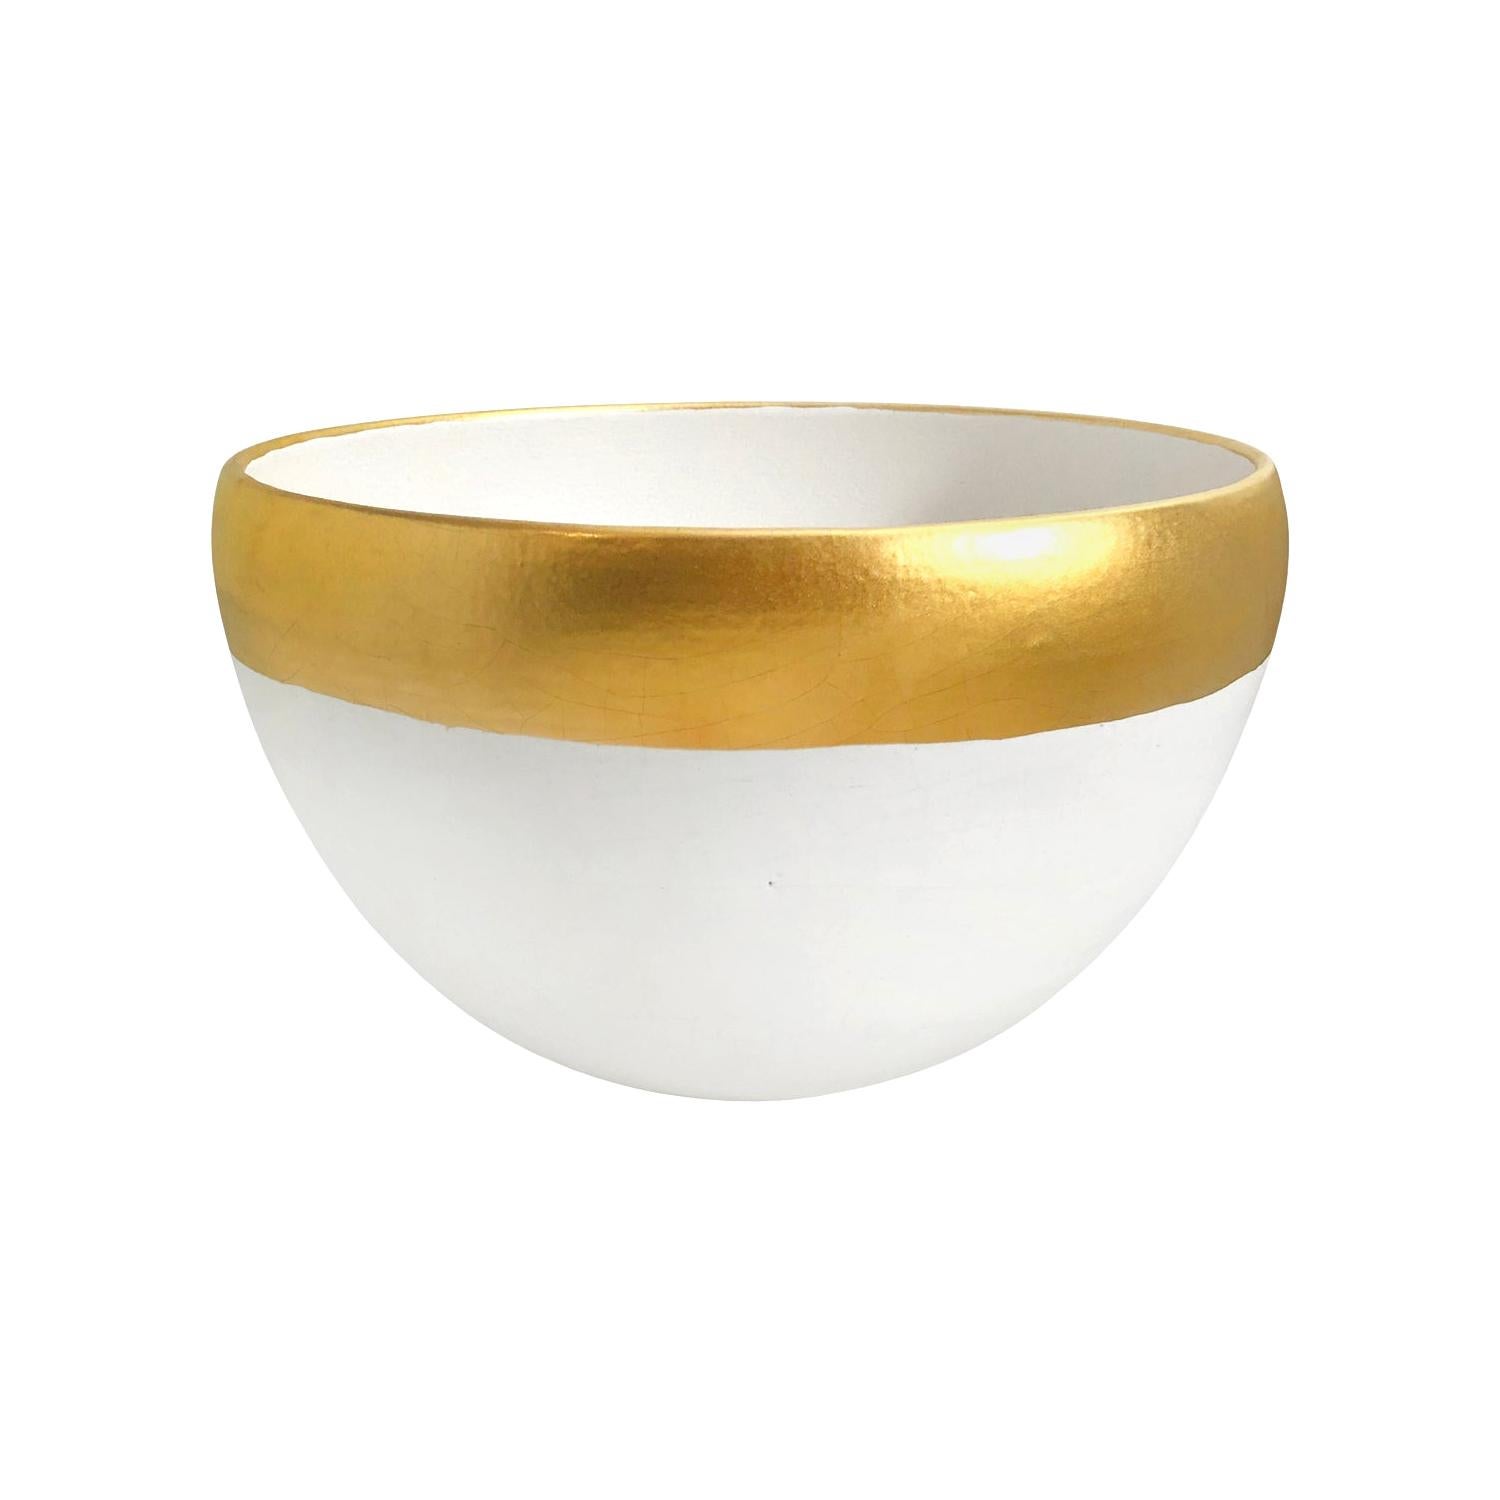 Ceramic Bowl with White Crackle Glaze and 22K Matte Gold Band by Sandi Fellman For Sale